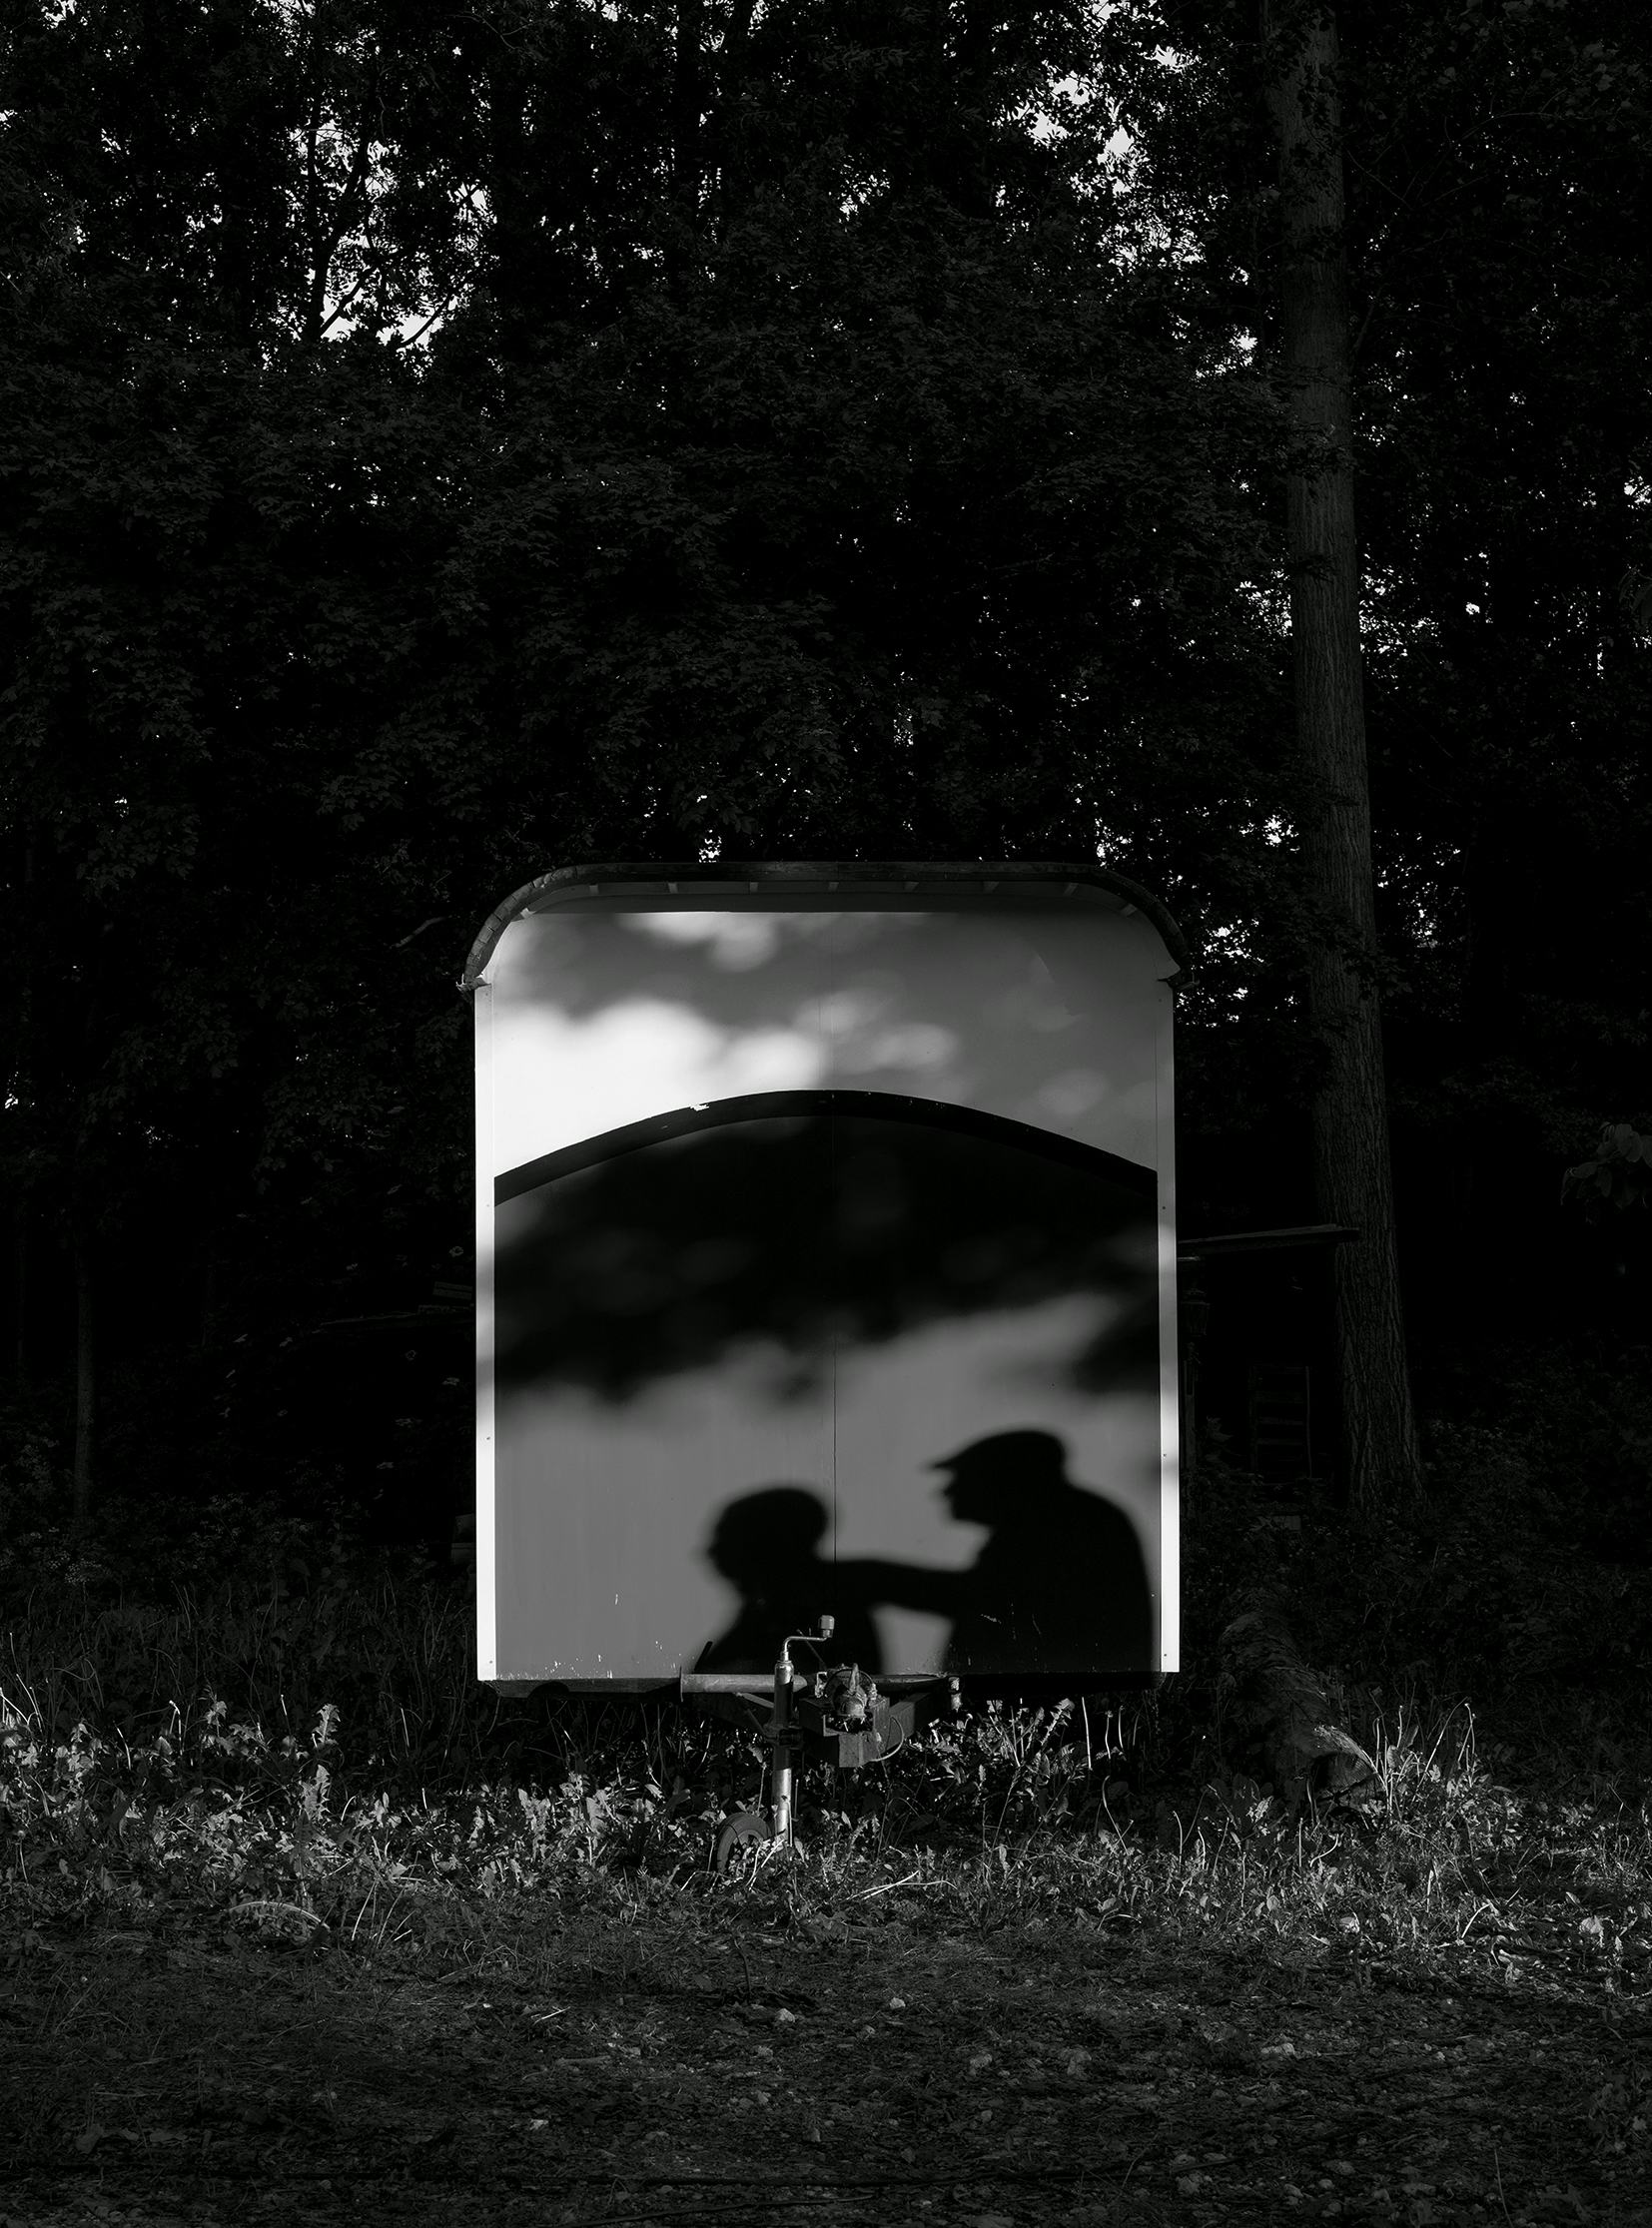 Black and white image of a trailer in a forest environment, on which the shadow of two men is visible. © Bebe Blanco Agterberg